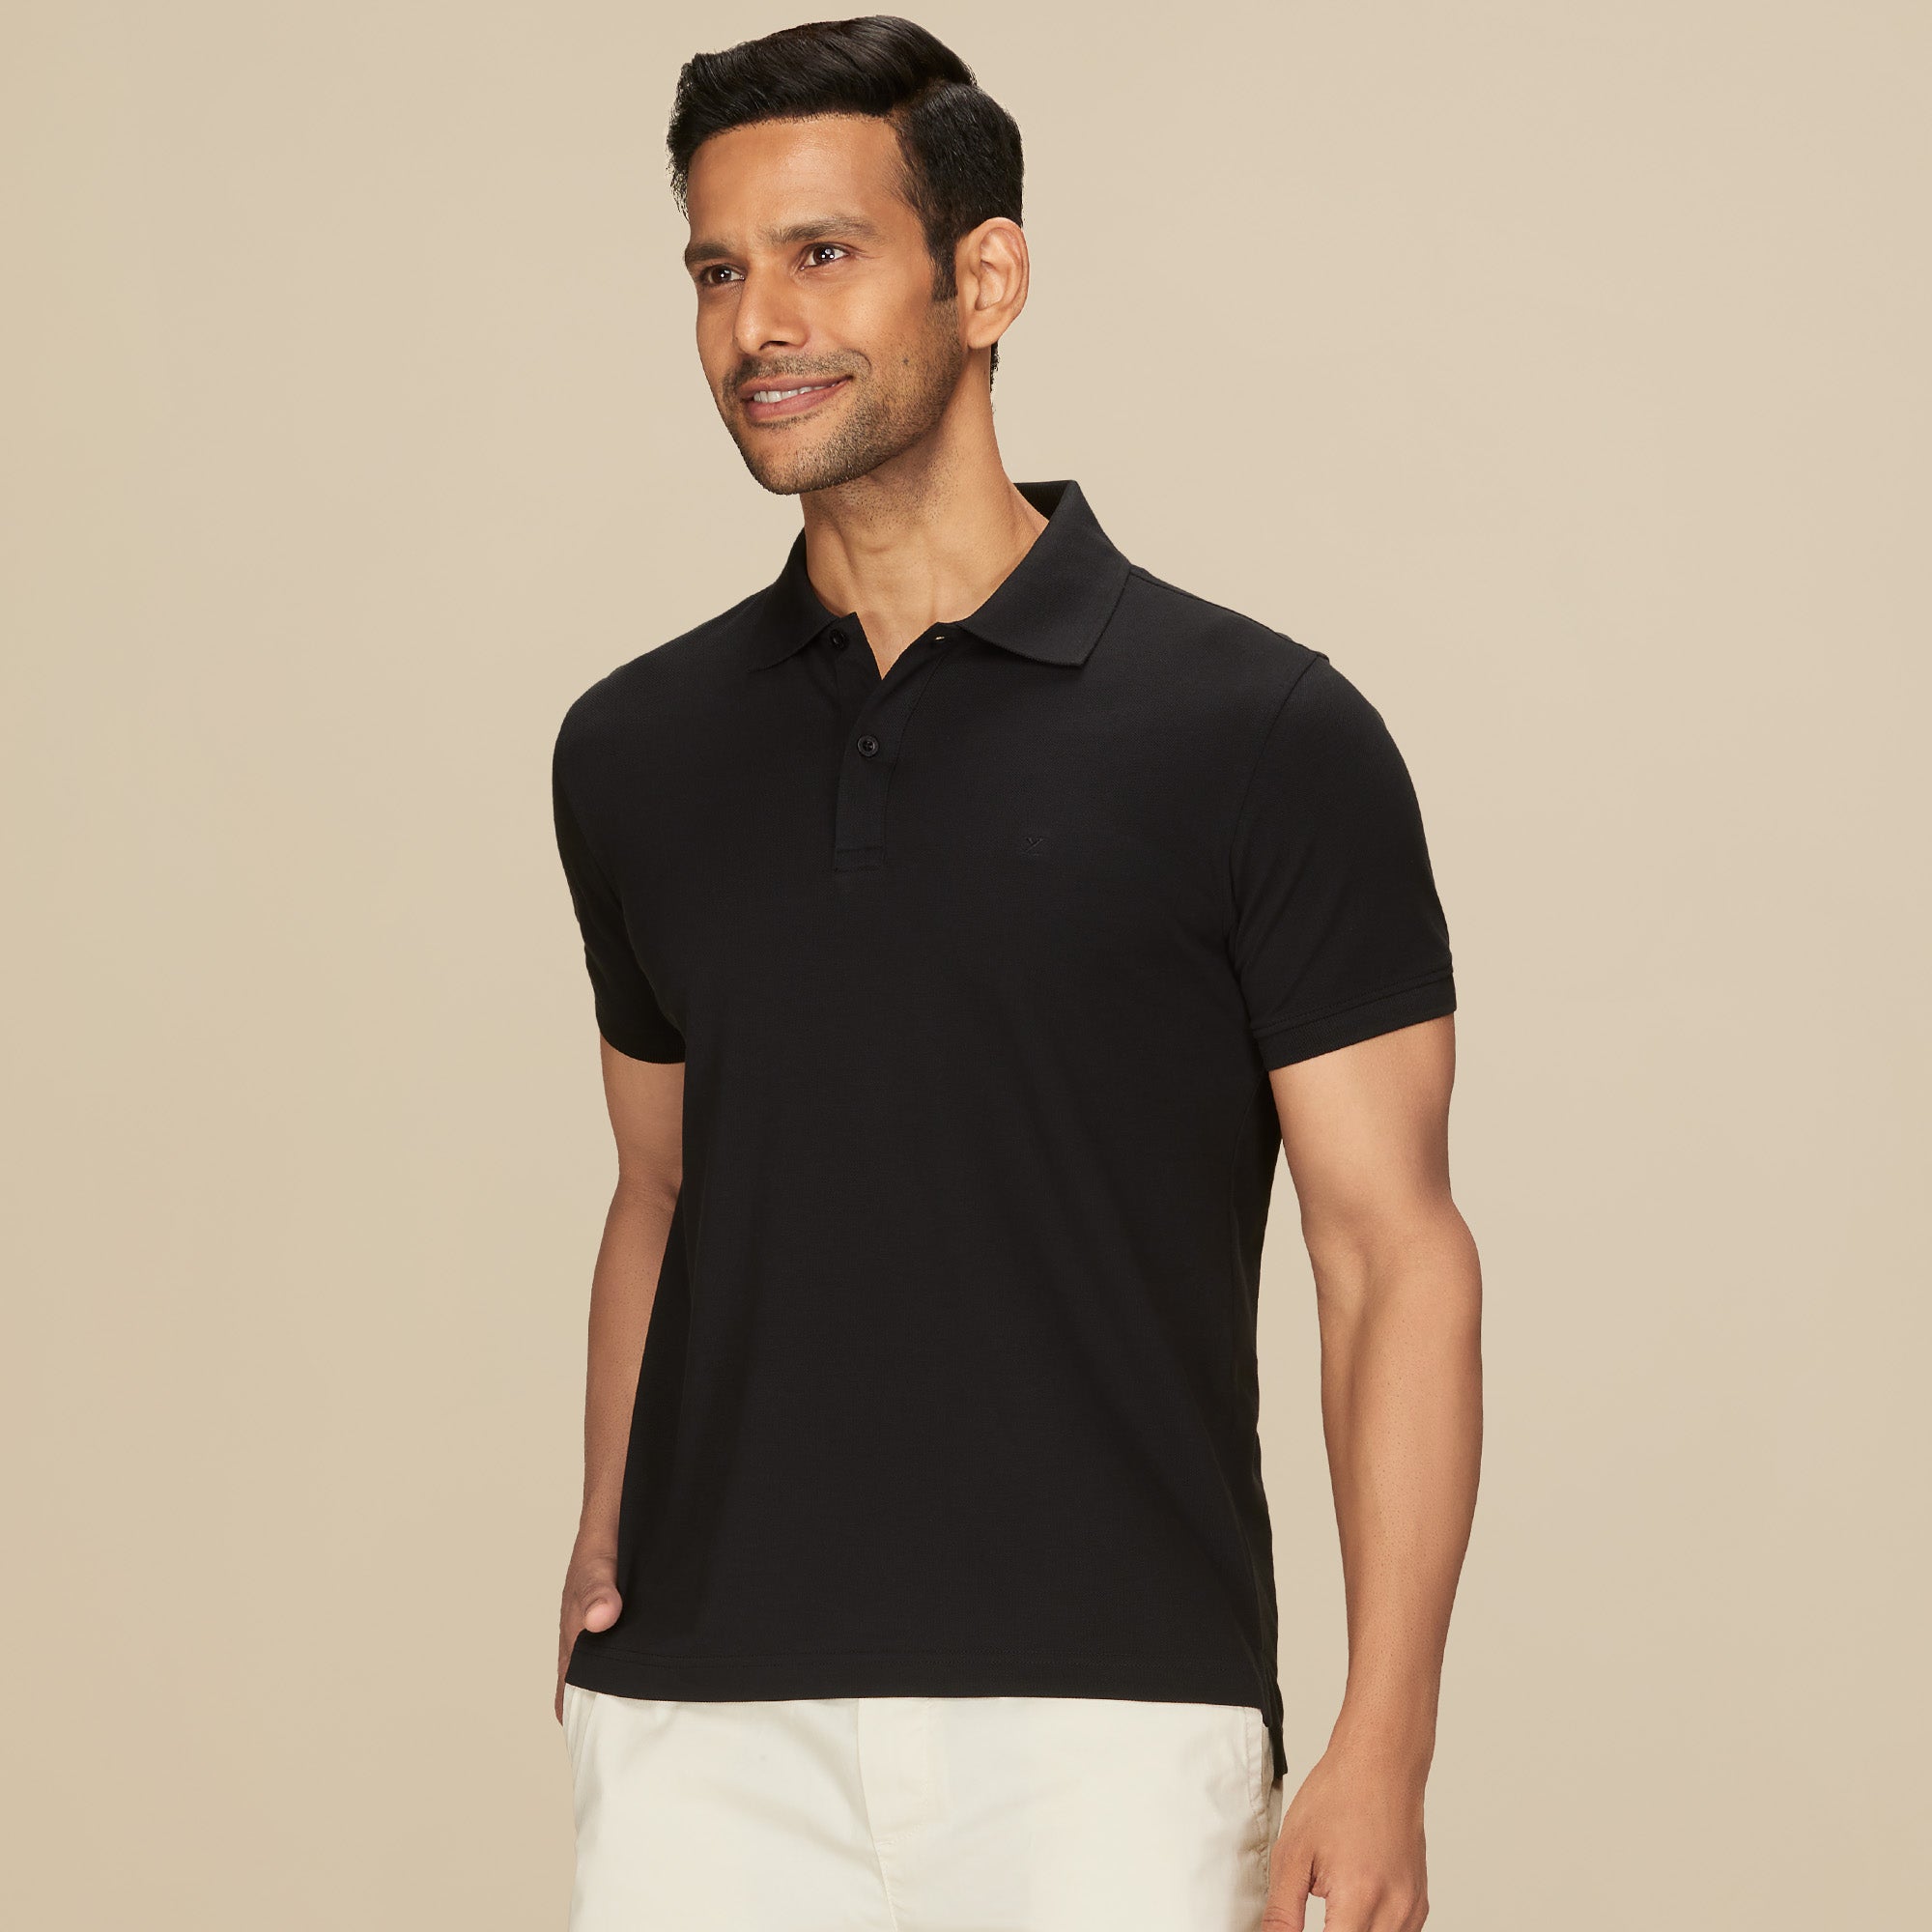 What Is The Combed Cotton Used In My Polo Shirt?